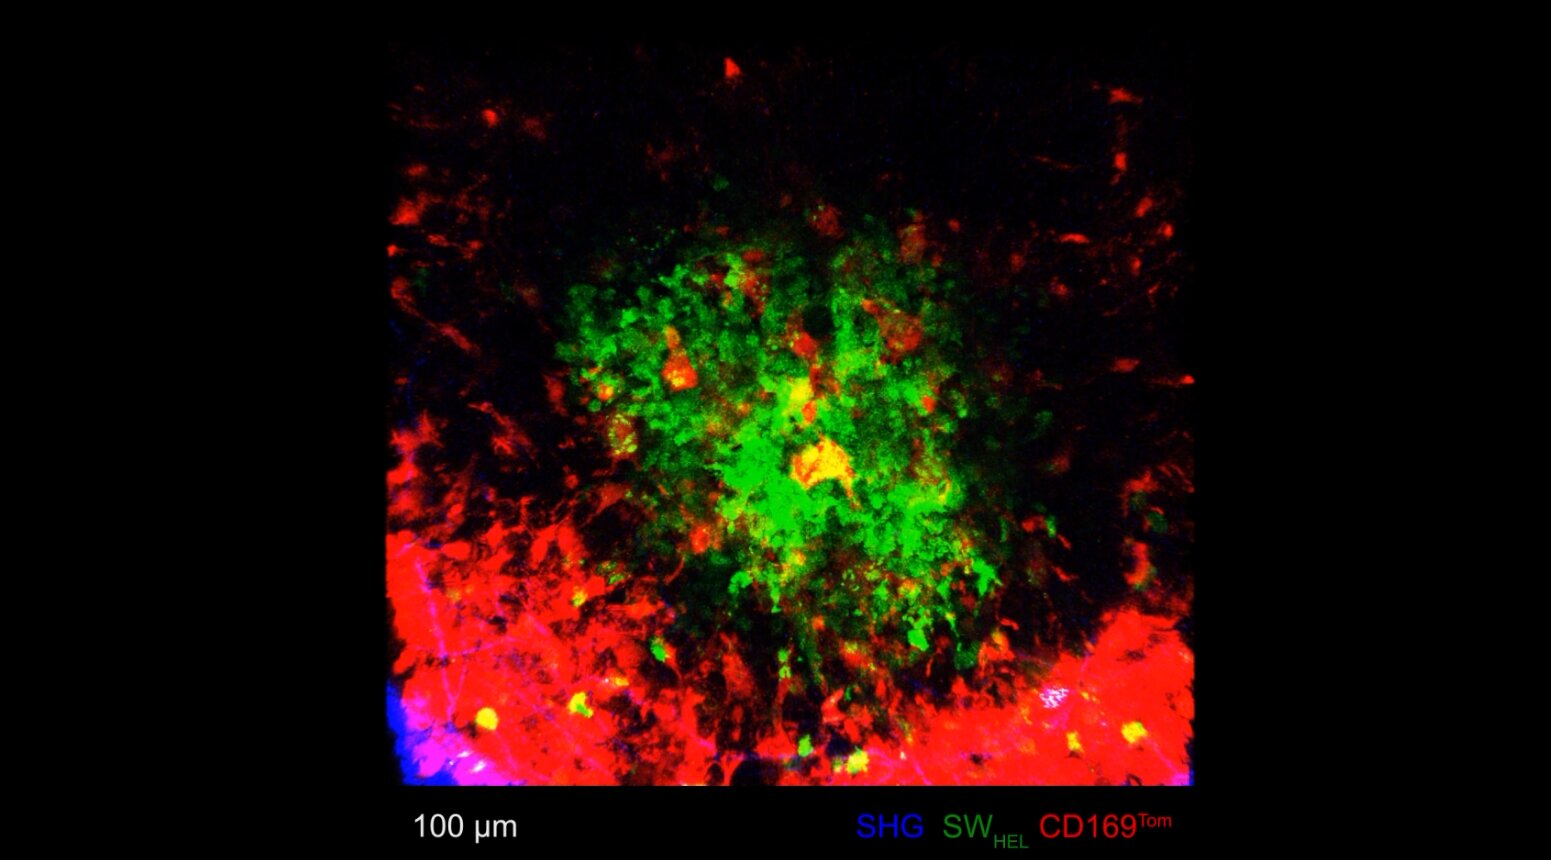 2-Photon microscope image of the germinal centre inside a lymph node, showing B cells (green) moving around and tingible body macrophages (red) evenly dispersed to grab the dead and dying cells